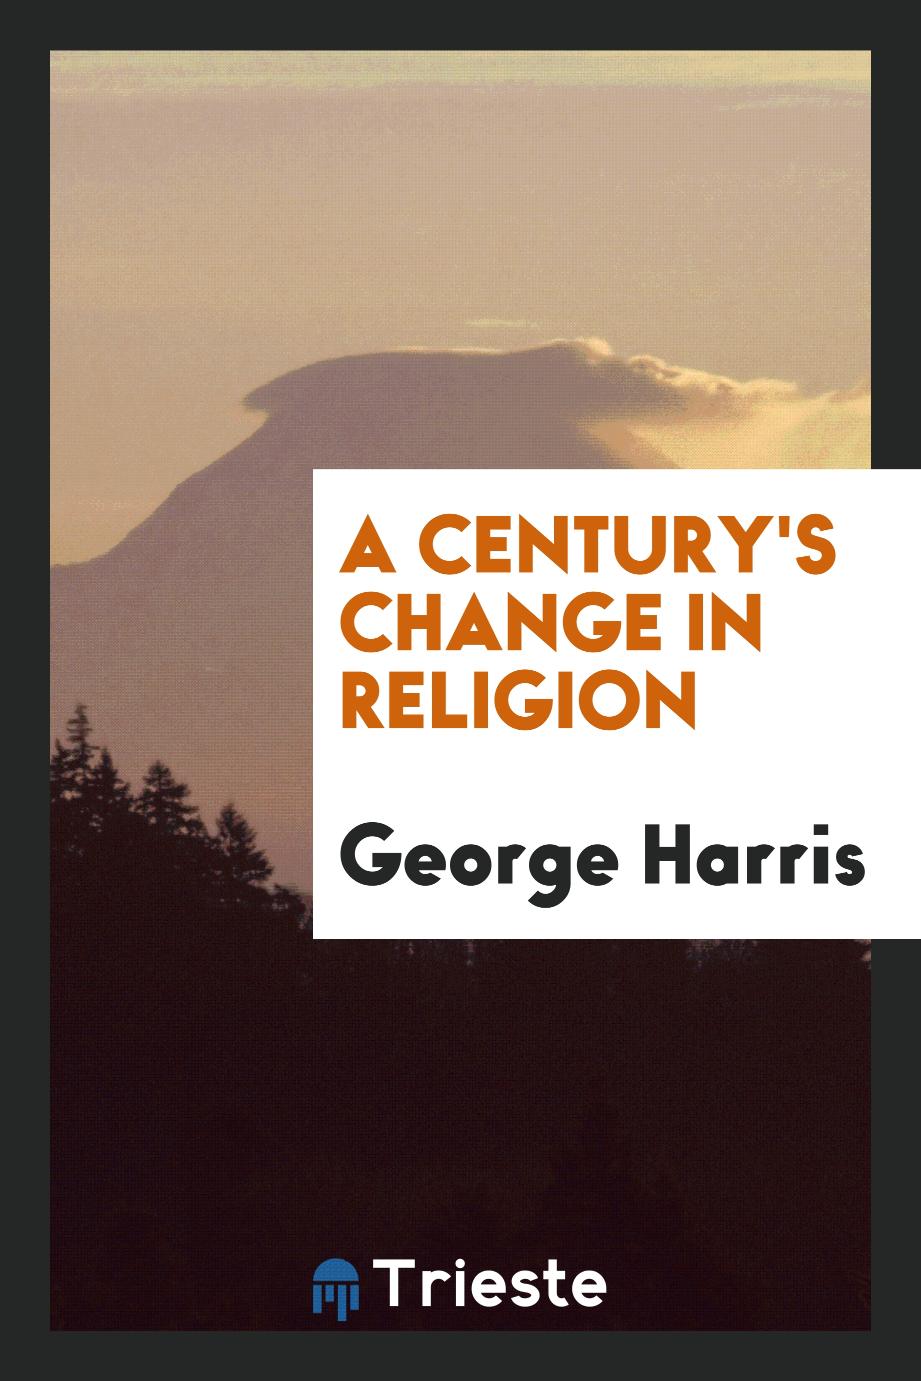 A Century's Change in Religion